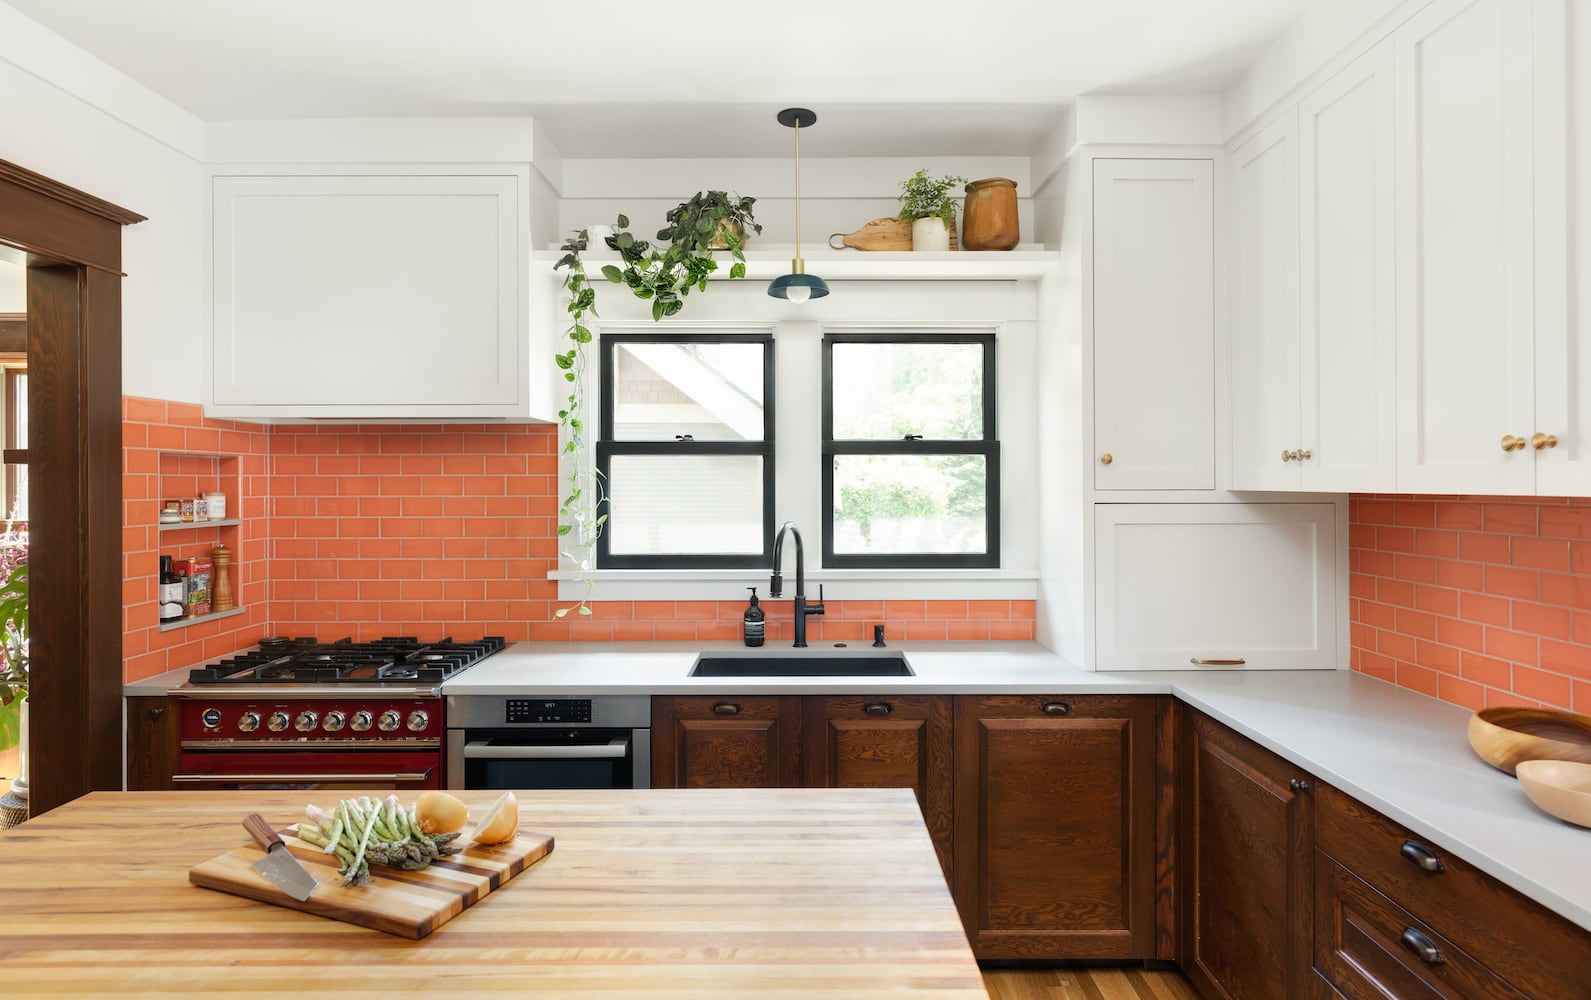 Eclectic, playfully refined Portland kitchen with orange tile and Caesarstone counters